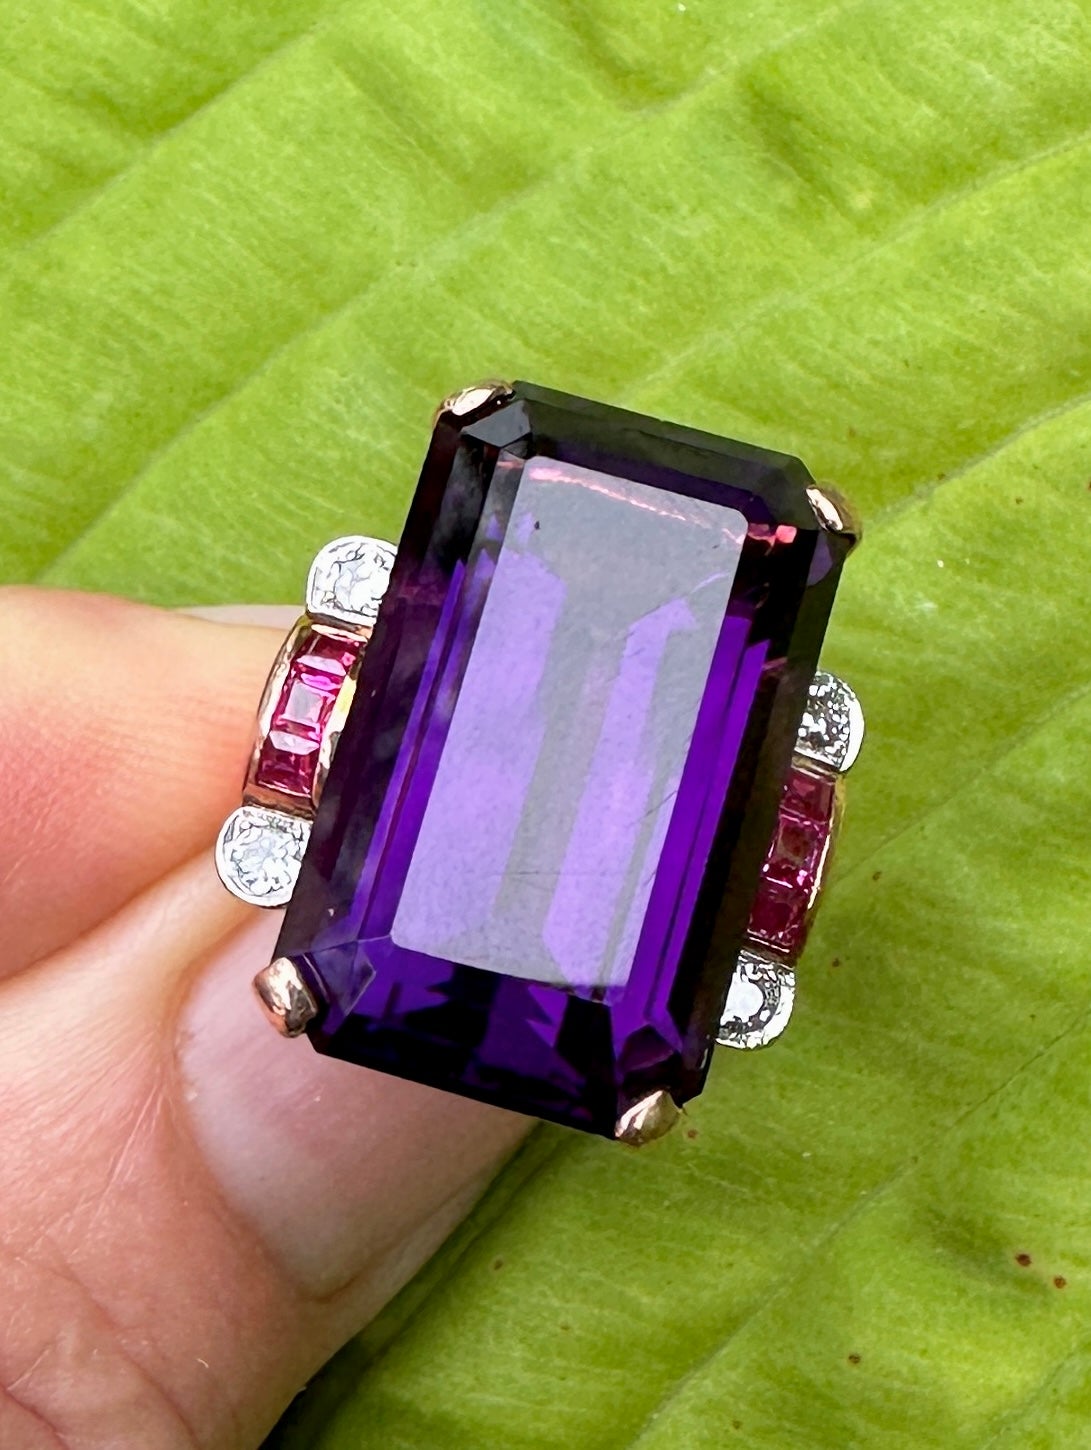 THIS IS A MAGNIFICENT ANTIQUE ART DECO - RETRO 23 CARAT EMERALD CUT SIBERIAN AMETHYST RING WITH FOUR GORGEOUS OLD MINE CUT DIAMONDS AND SIX SPECTACULAR SQUARE CHANNEL SET RUBIES IN 14 KARAT ROSE GOLD.  THE STUNNING MONUMENTAL 23 CARAT SIBERIAN